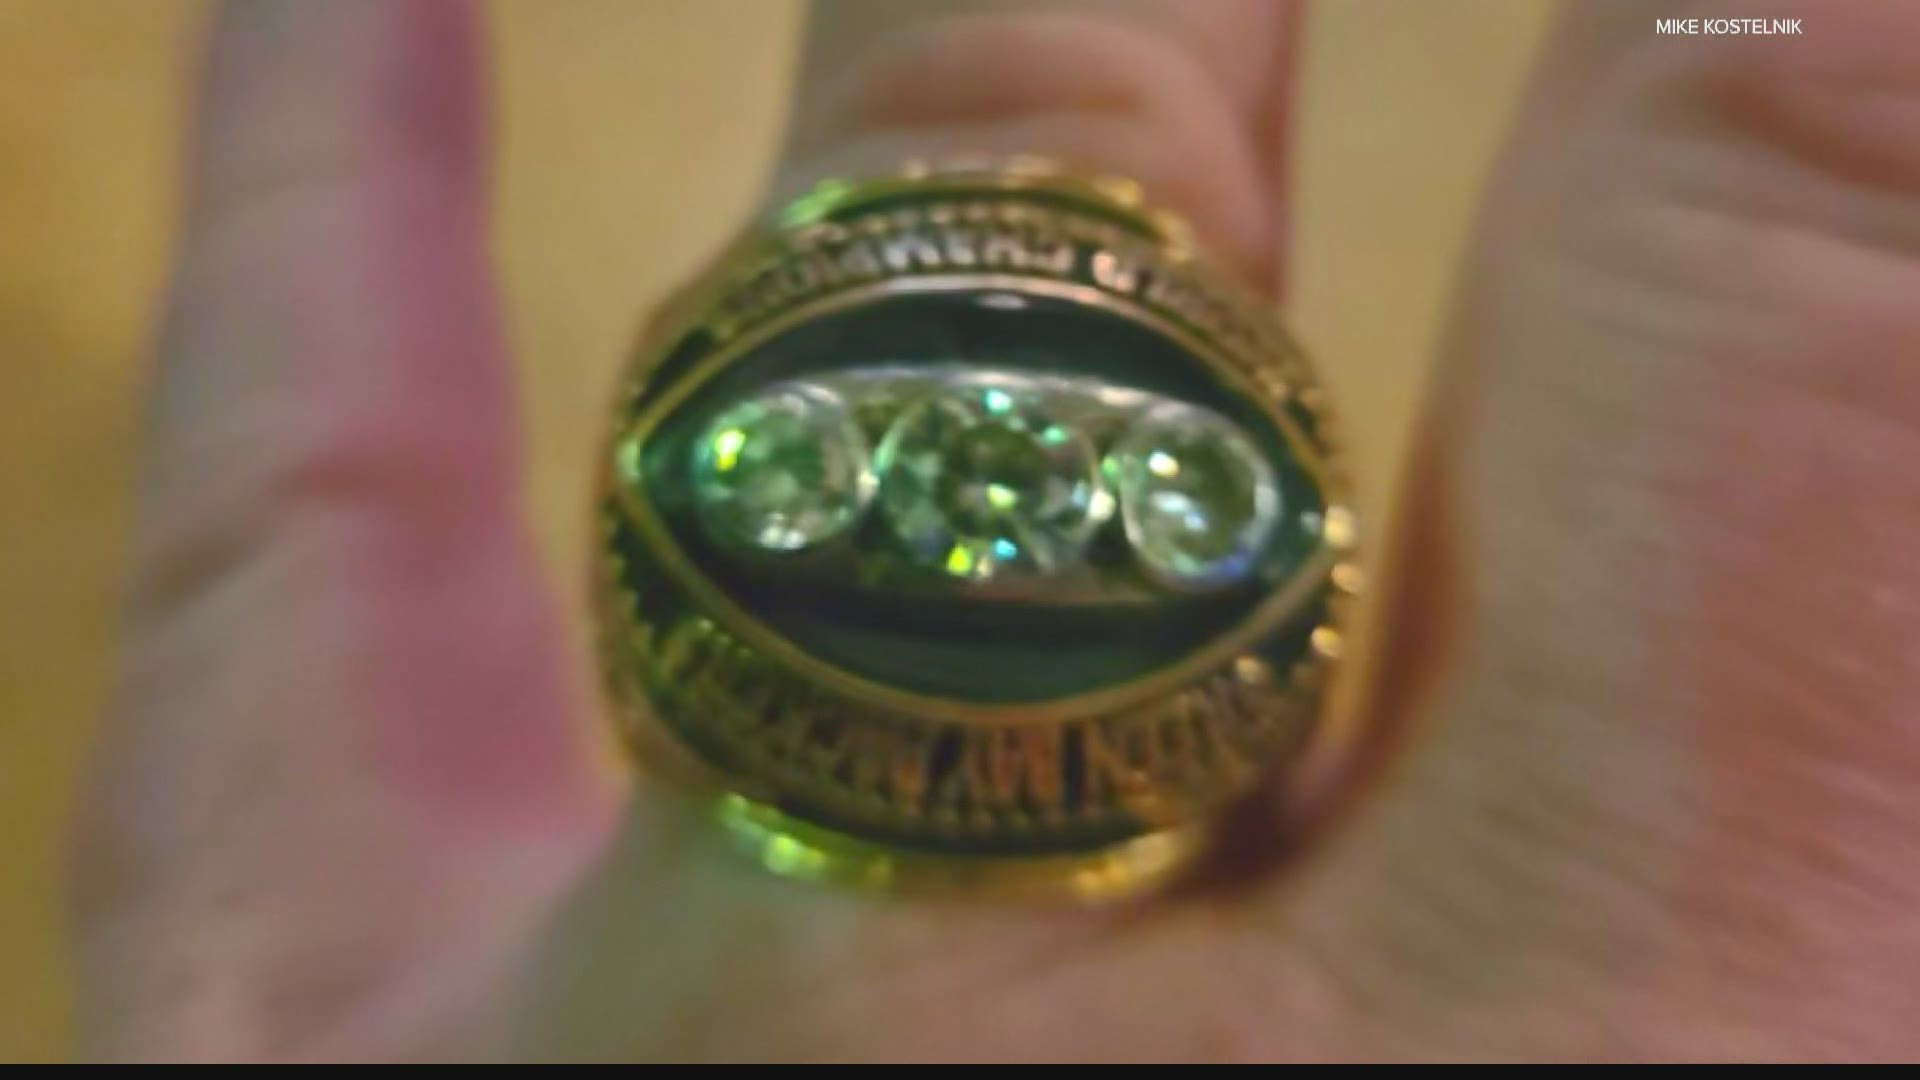 lost super bowl ring